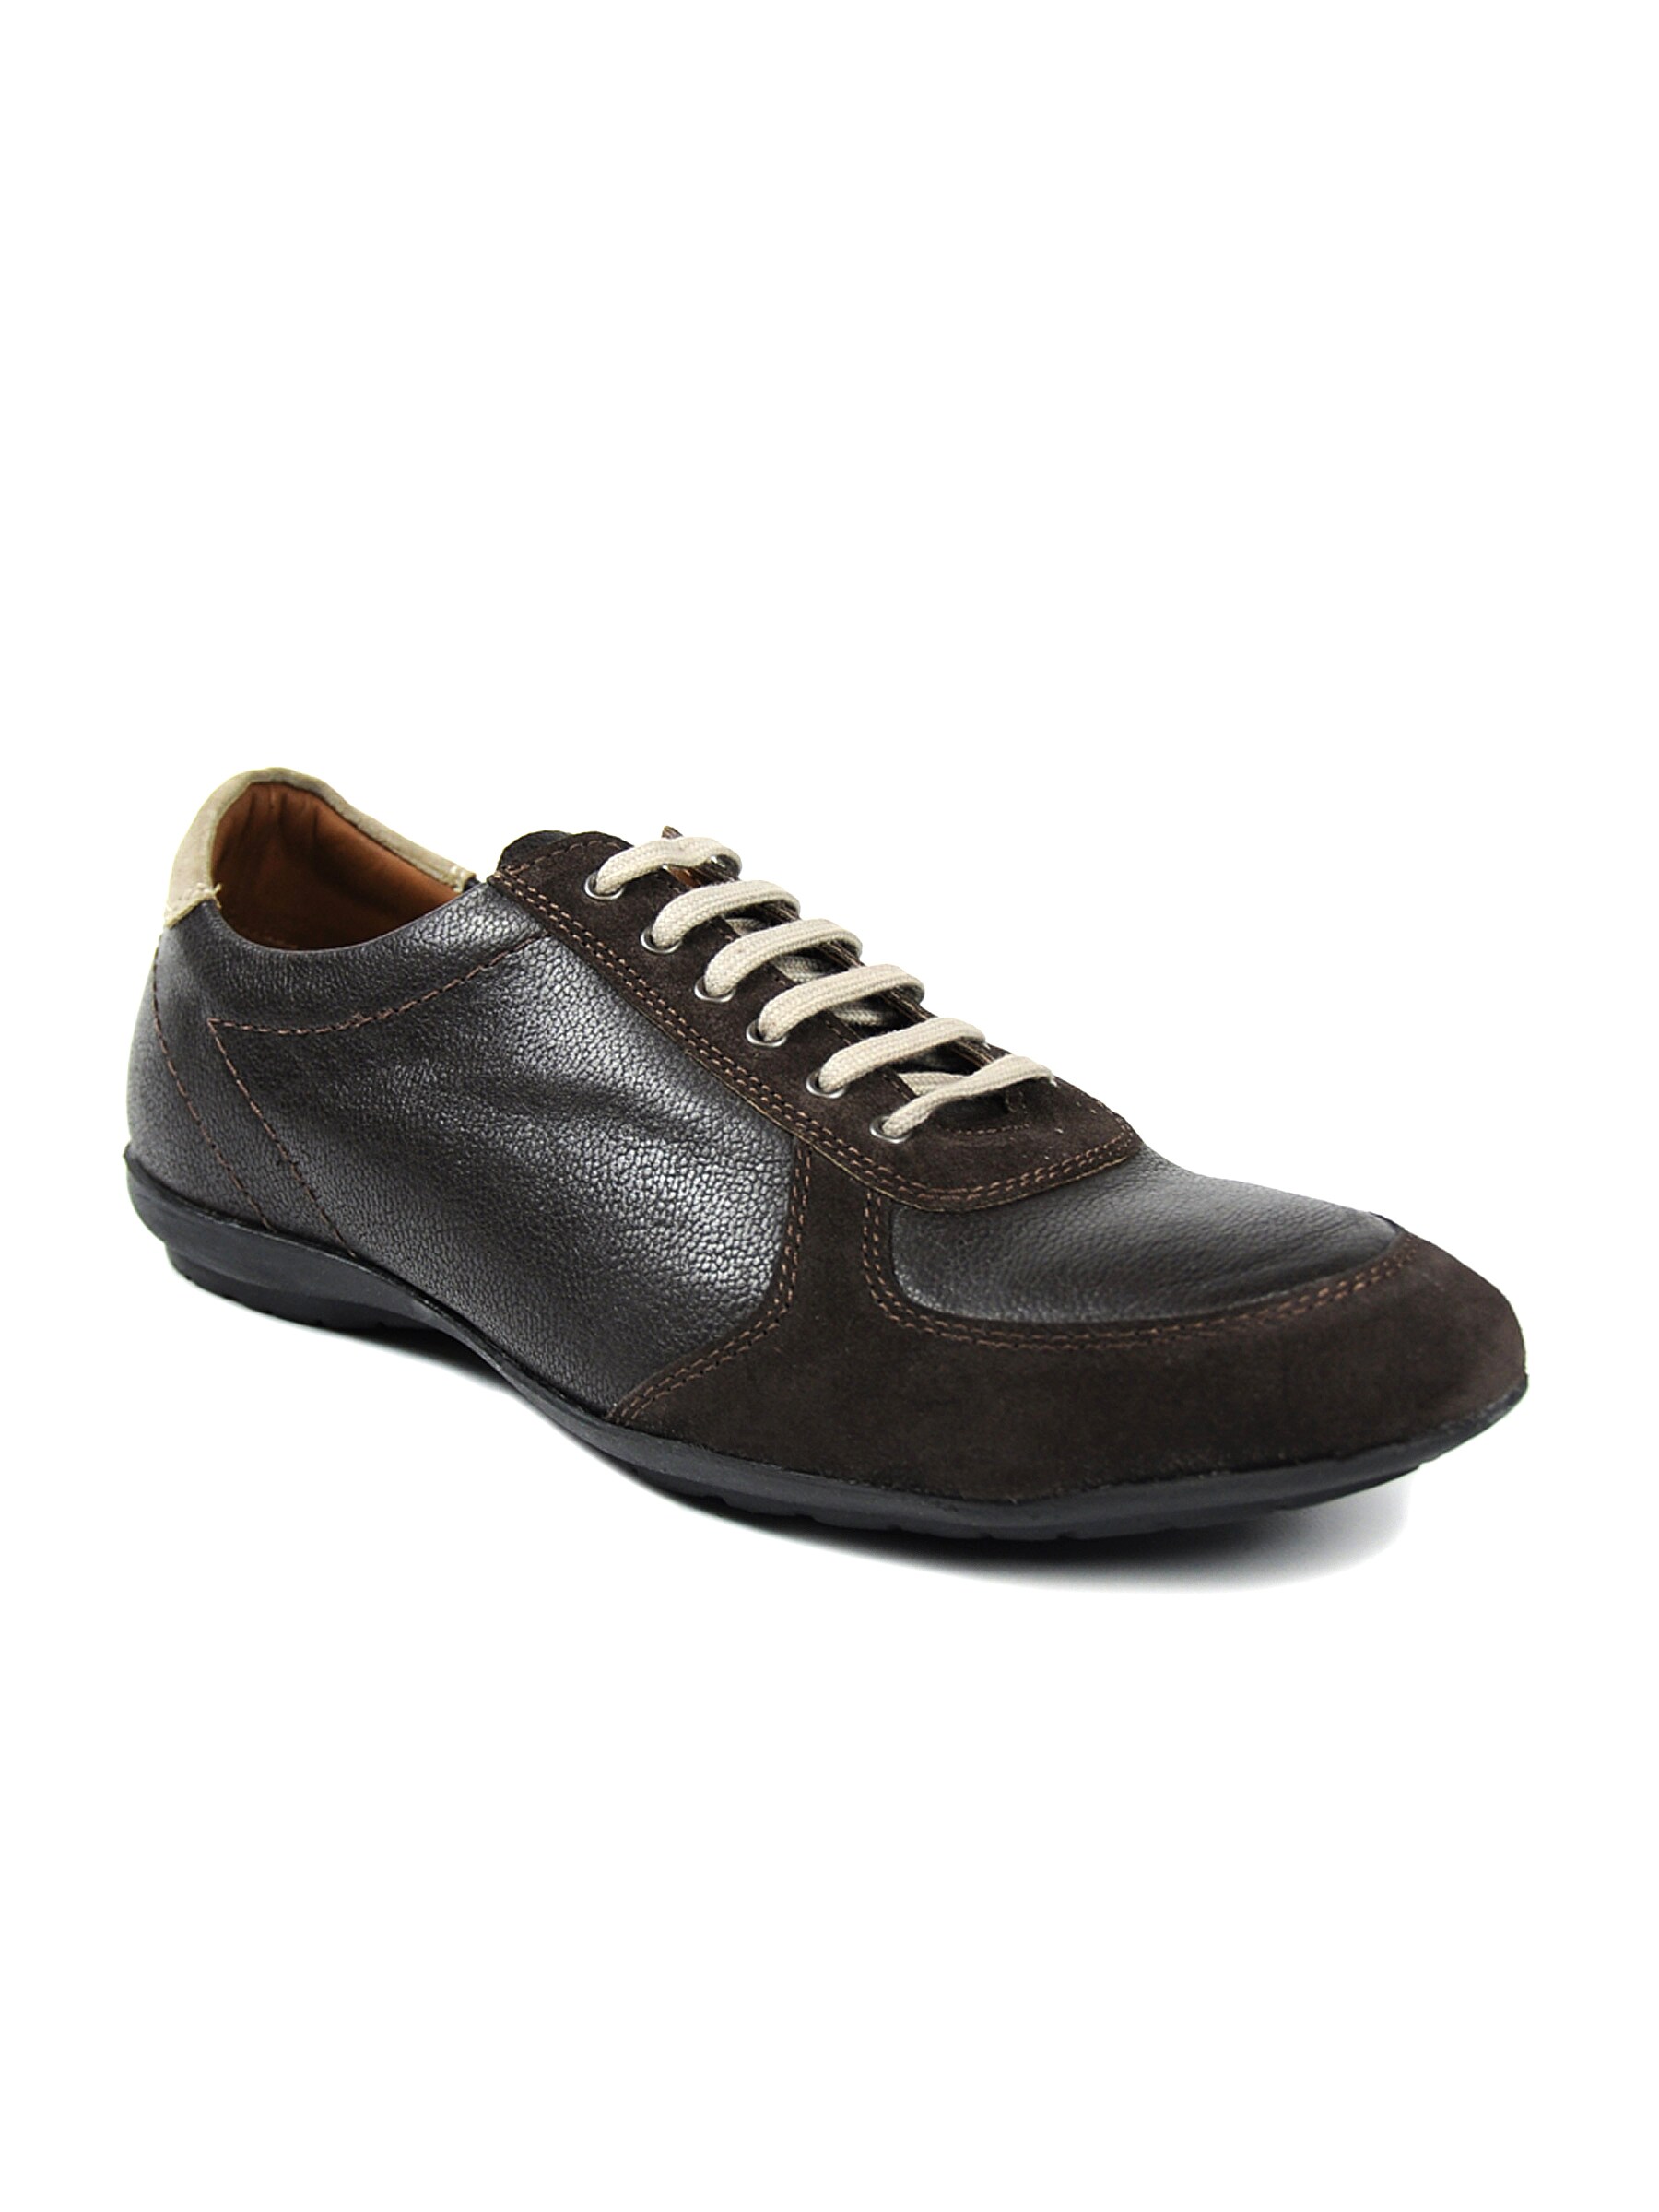 United Colors of Benetton Men Bournie Brown Casual Shoes